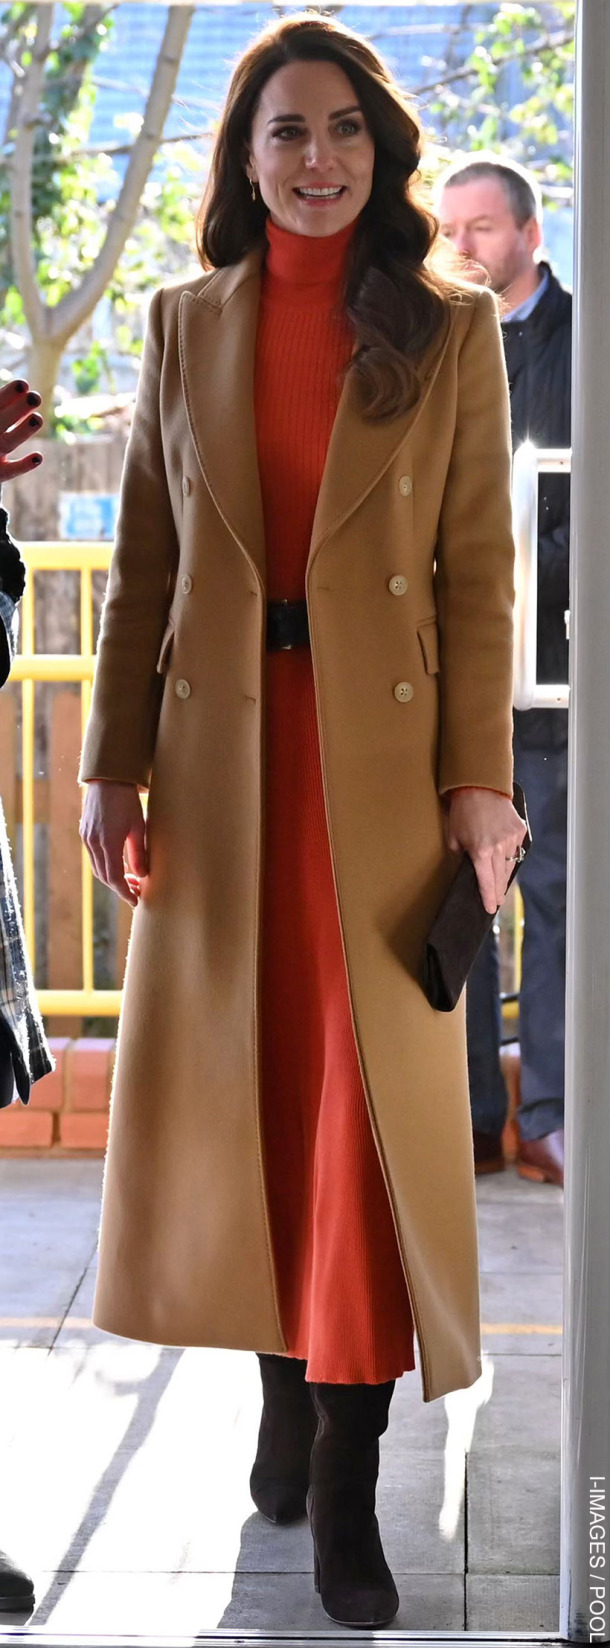 Kate Middleton wears a camel coat over orange-red separates while visiting a nursery school in Luton